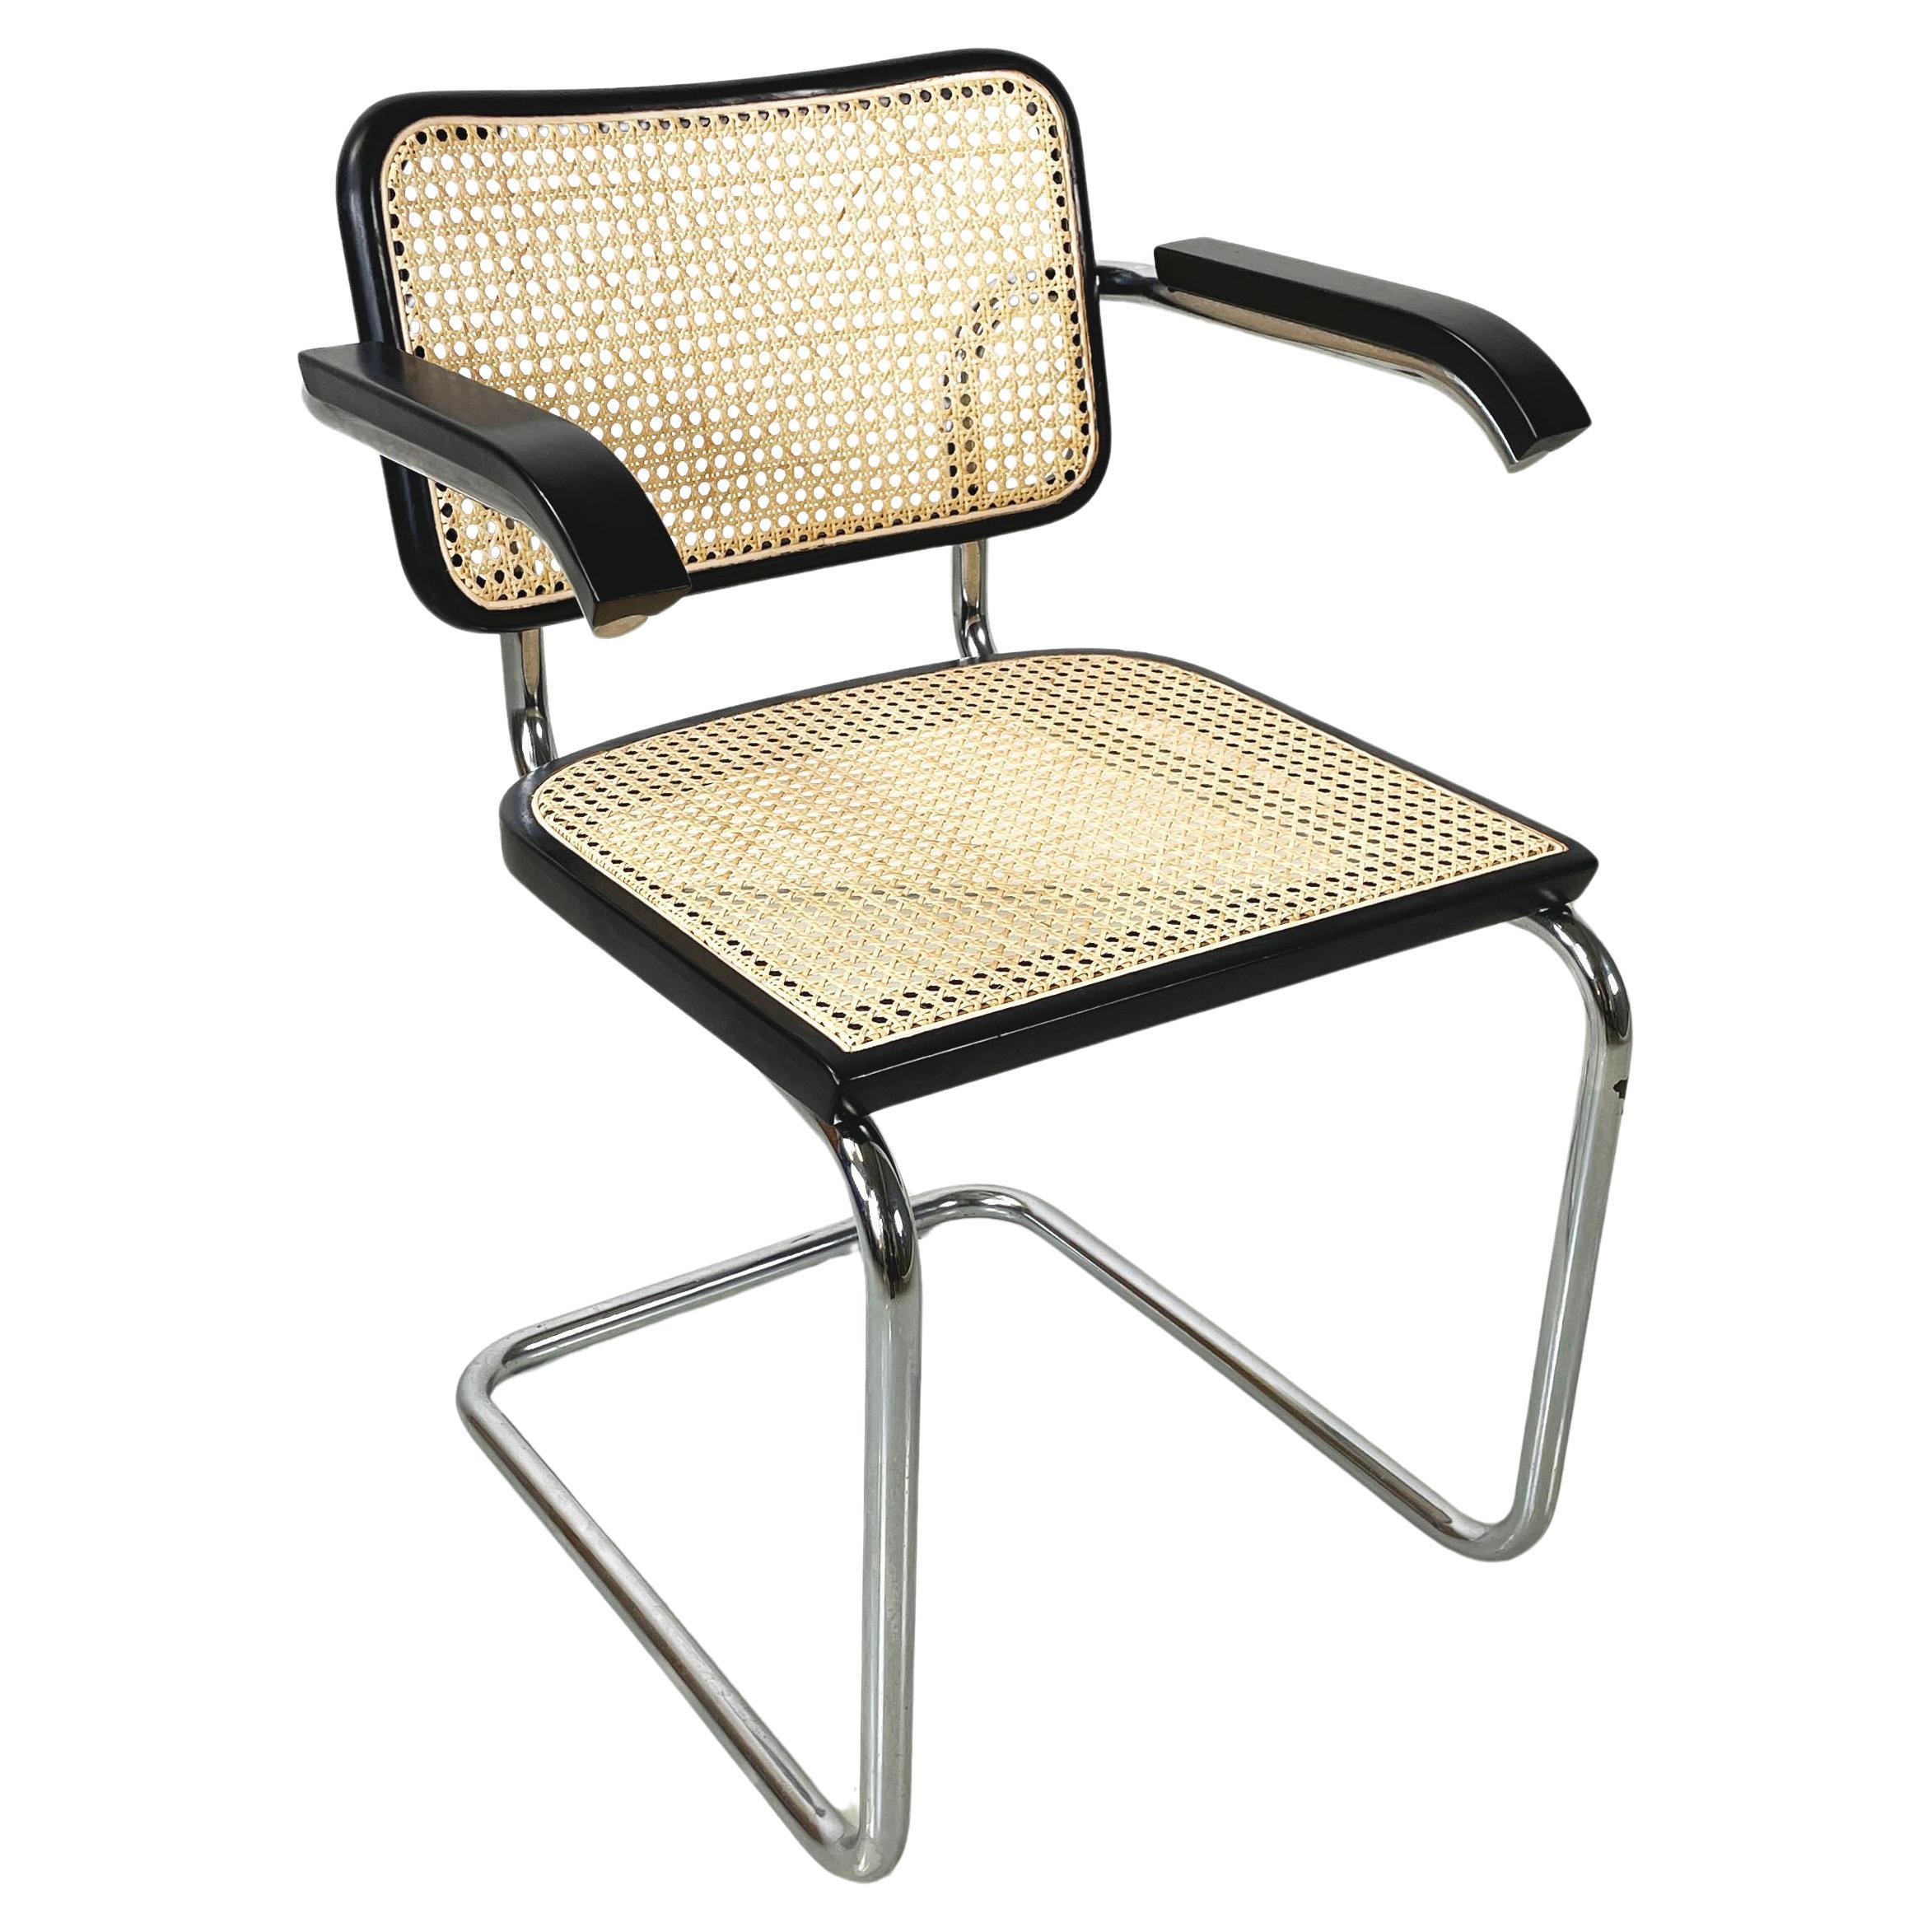 Italian mid-century modern Chair with armrests by Marcel Breuer for Gavina 1960s